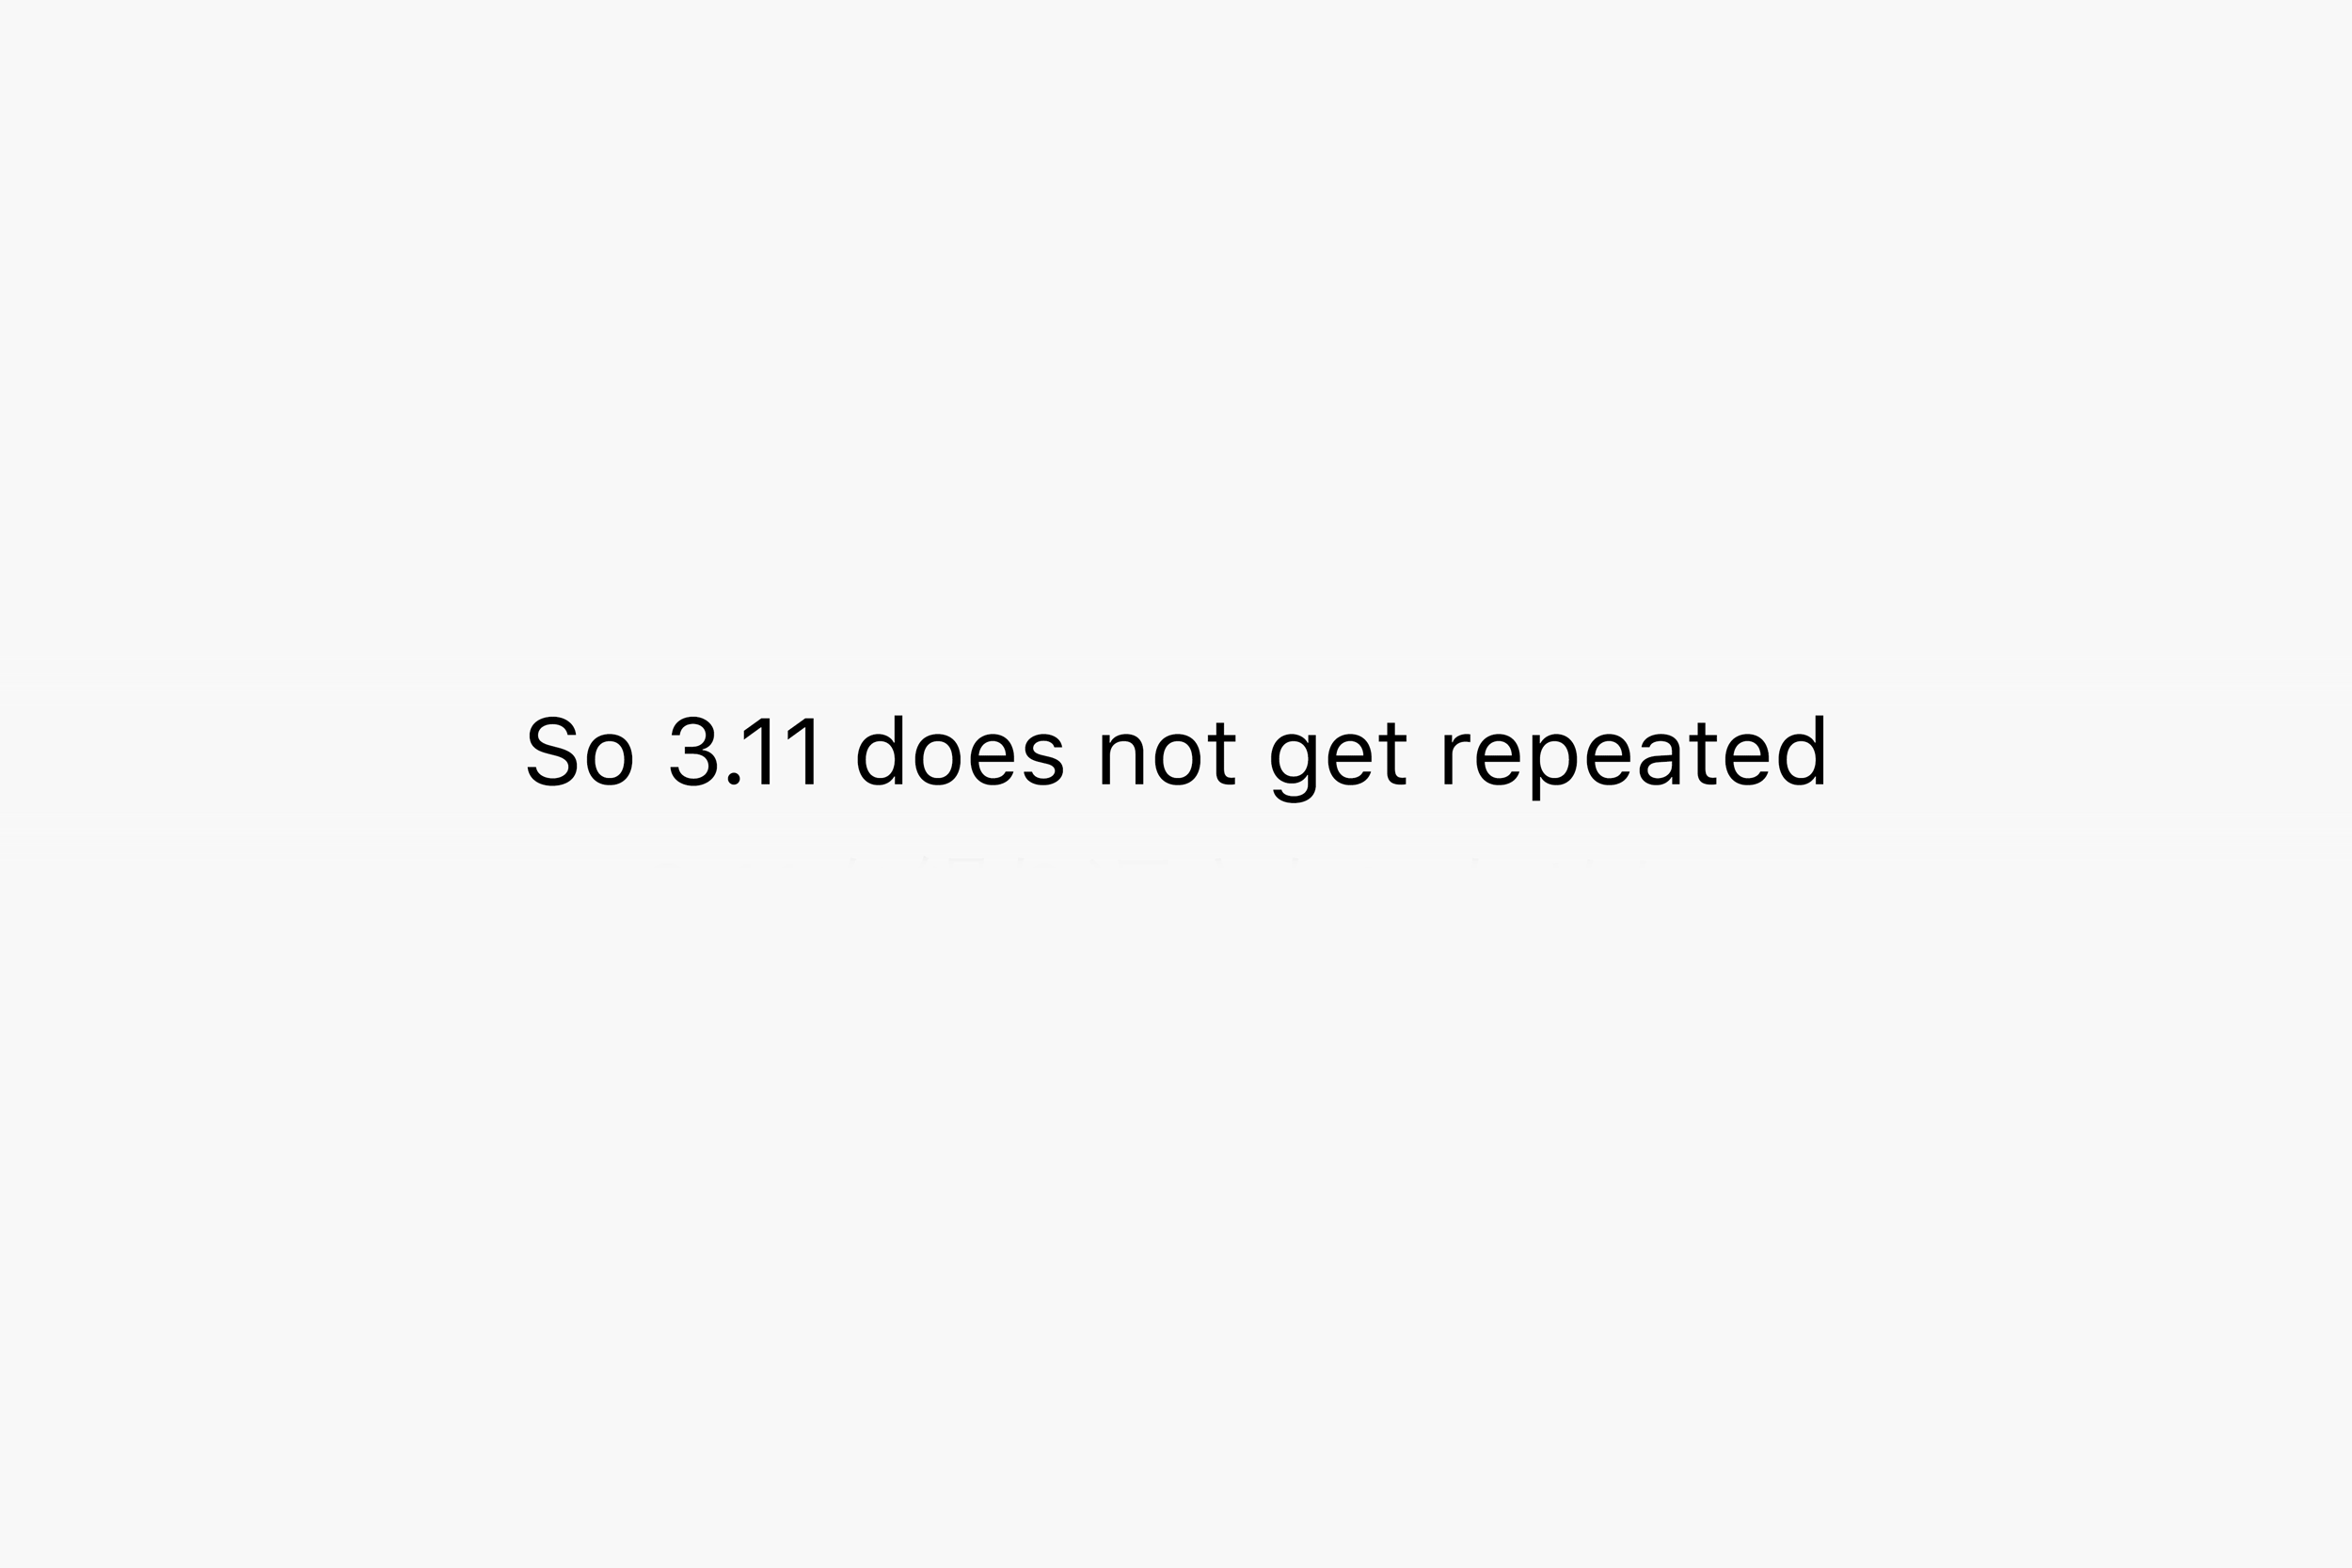 so_3.11_does_not_get_repeated_3.11を繰り返さないために